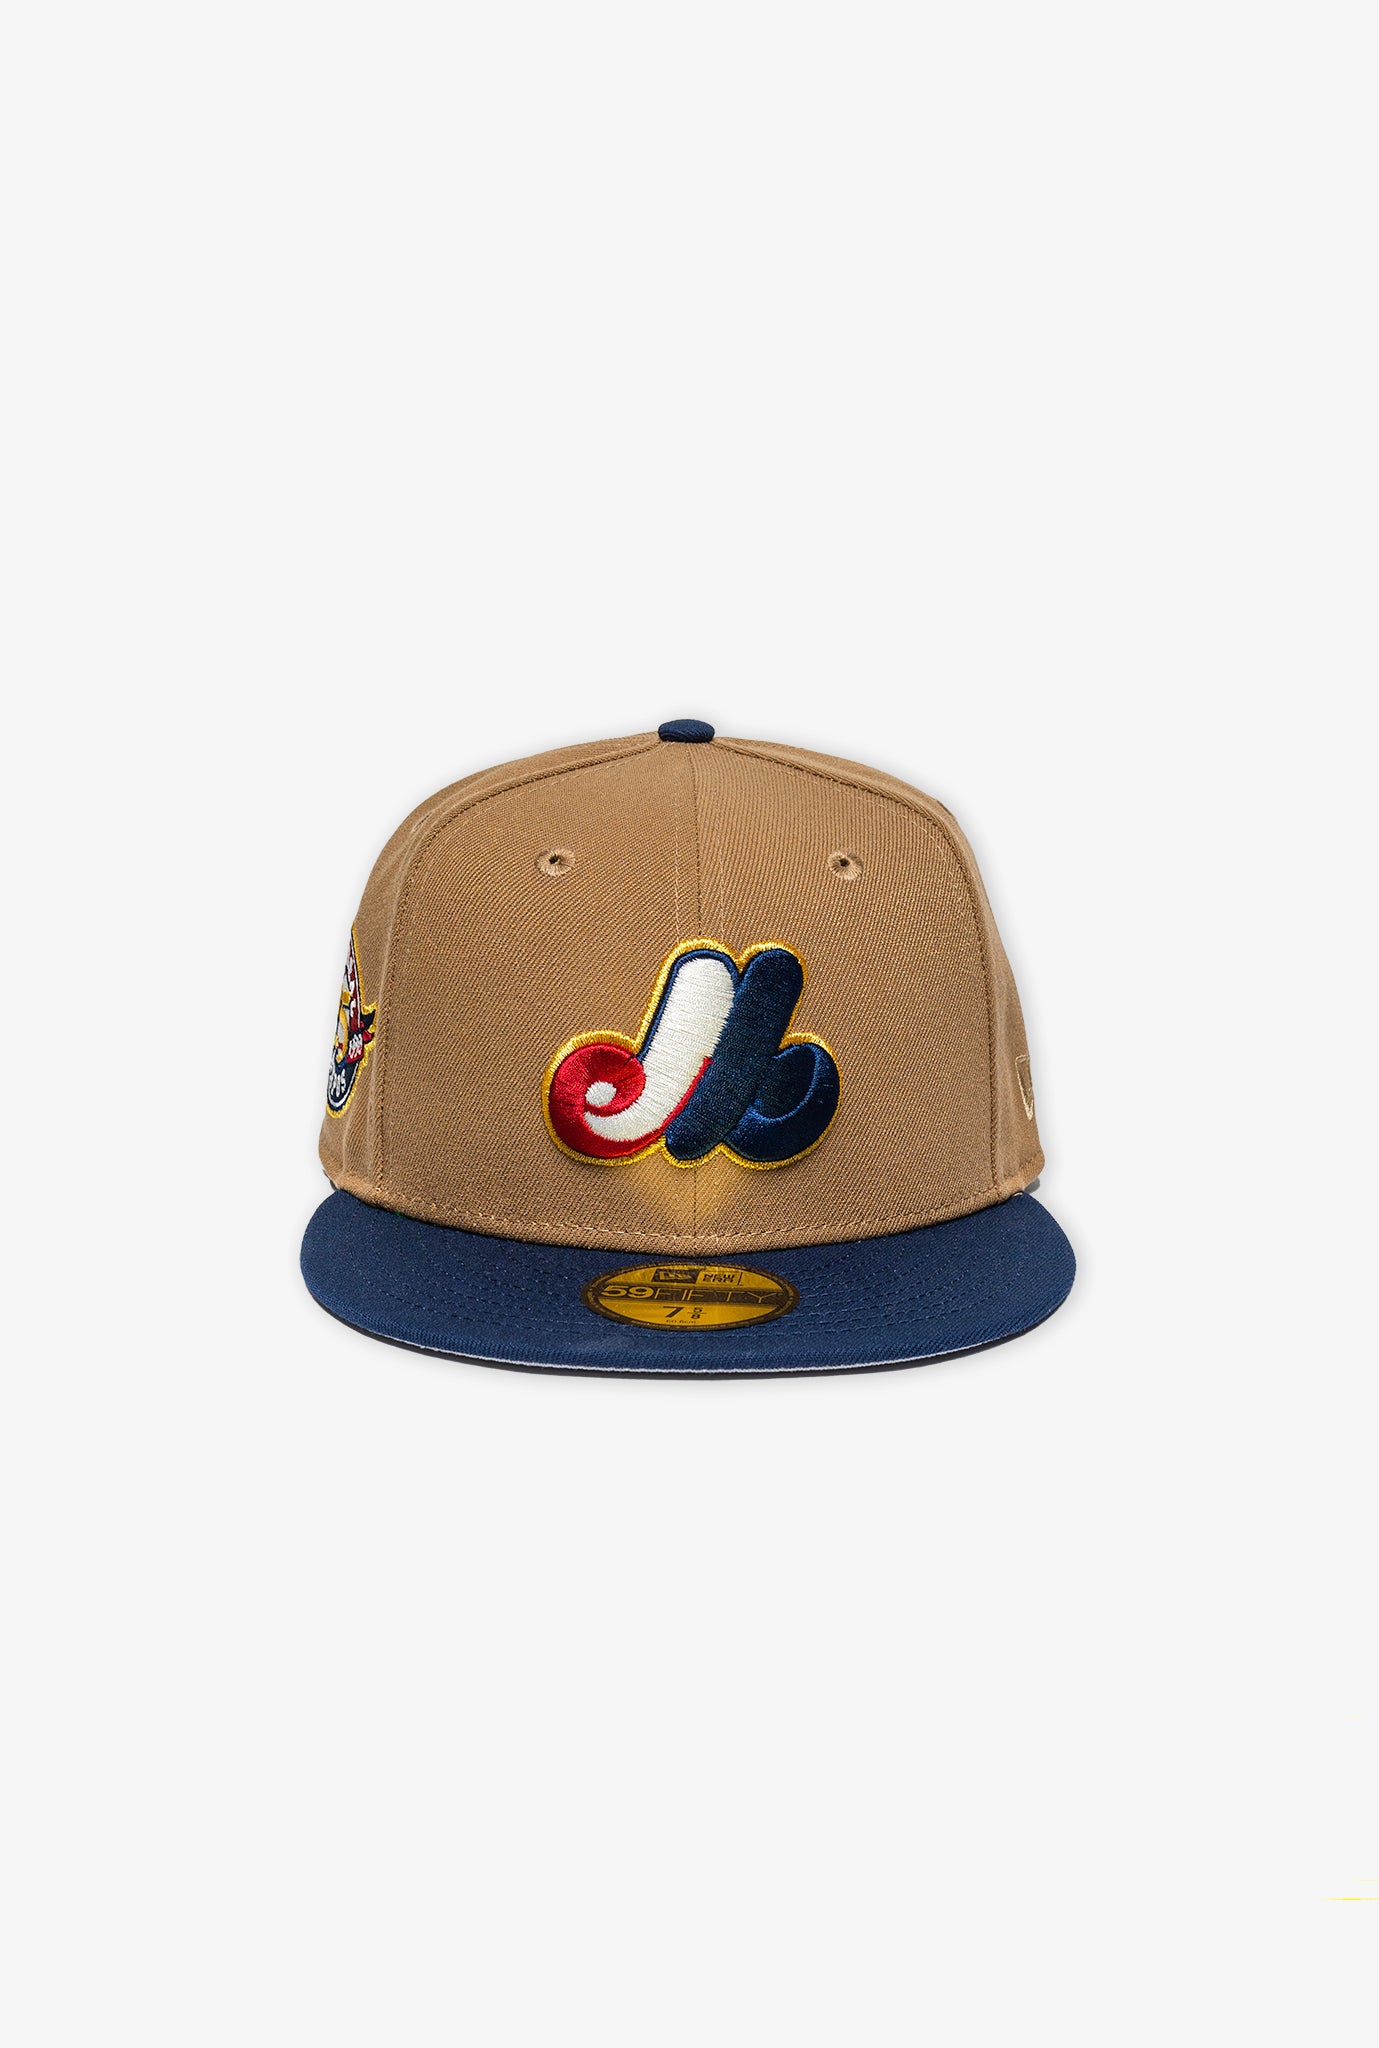 Montreal Expos 25th Anniversary 59FIFTY - Khaki/Oceanside